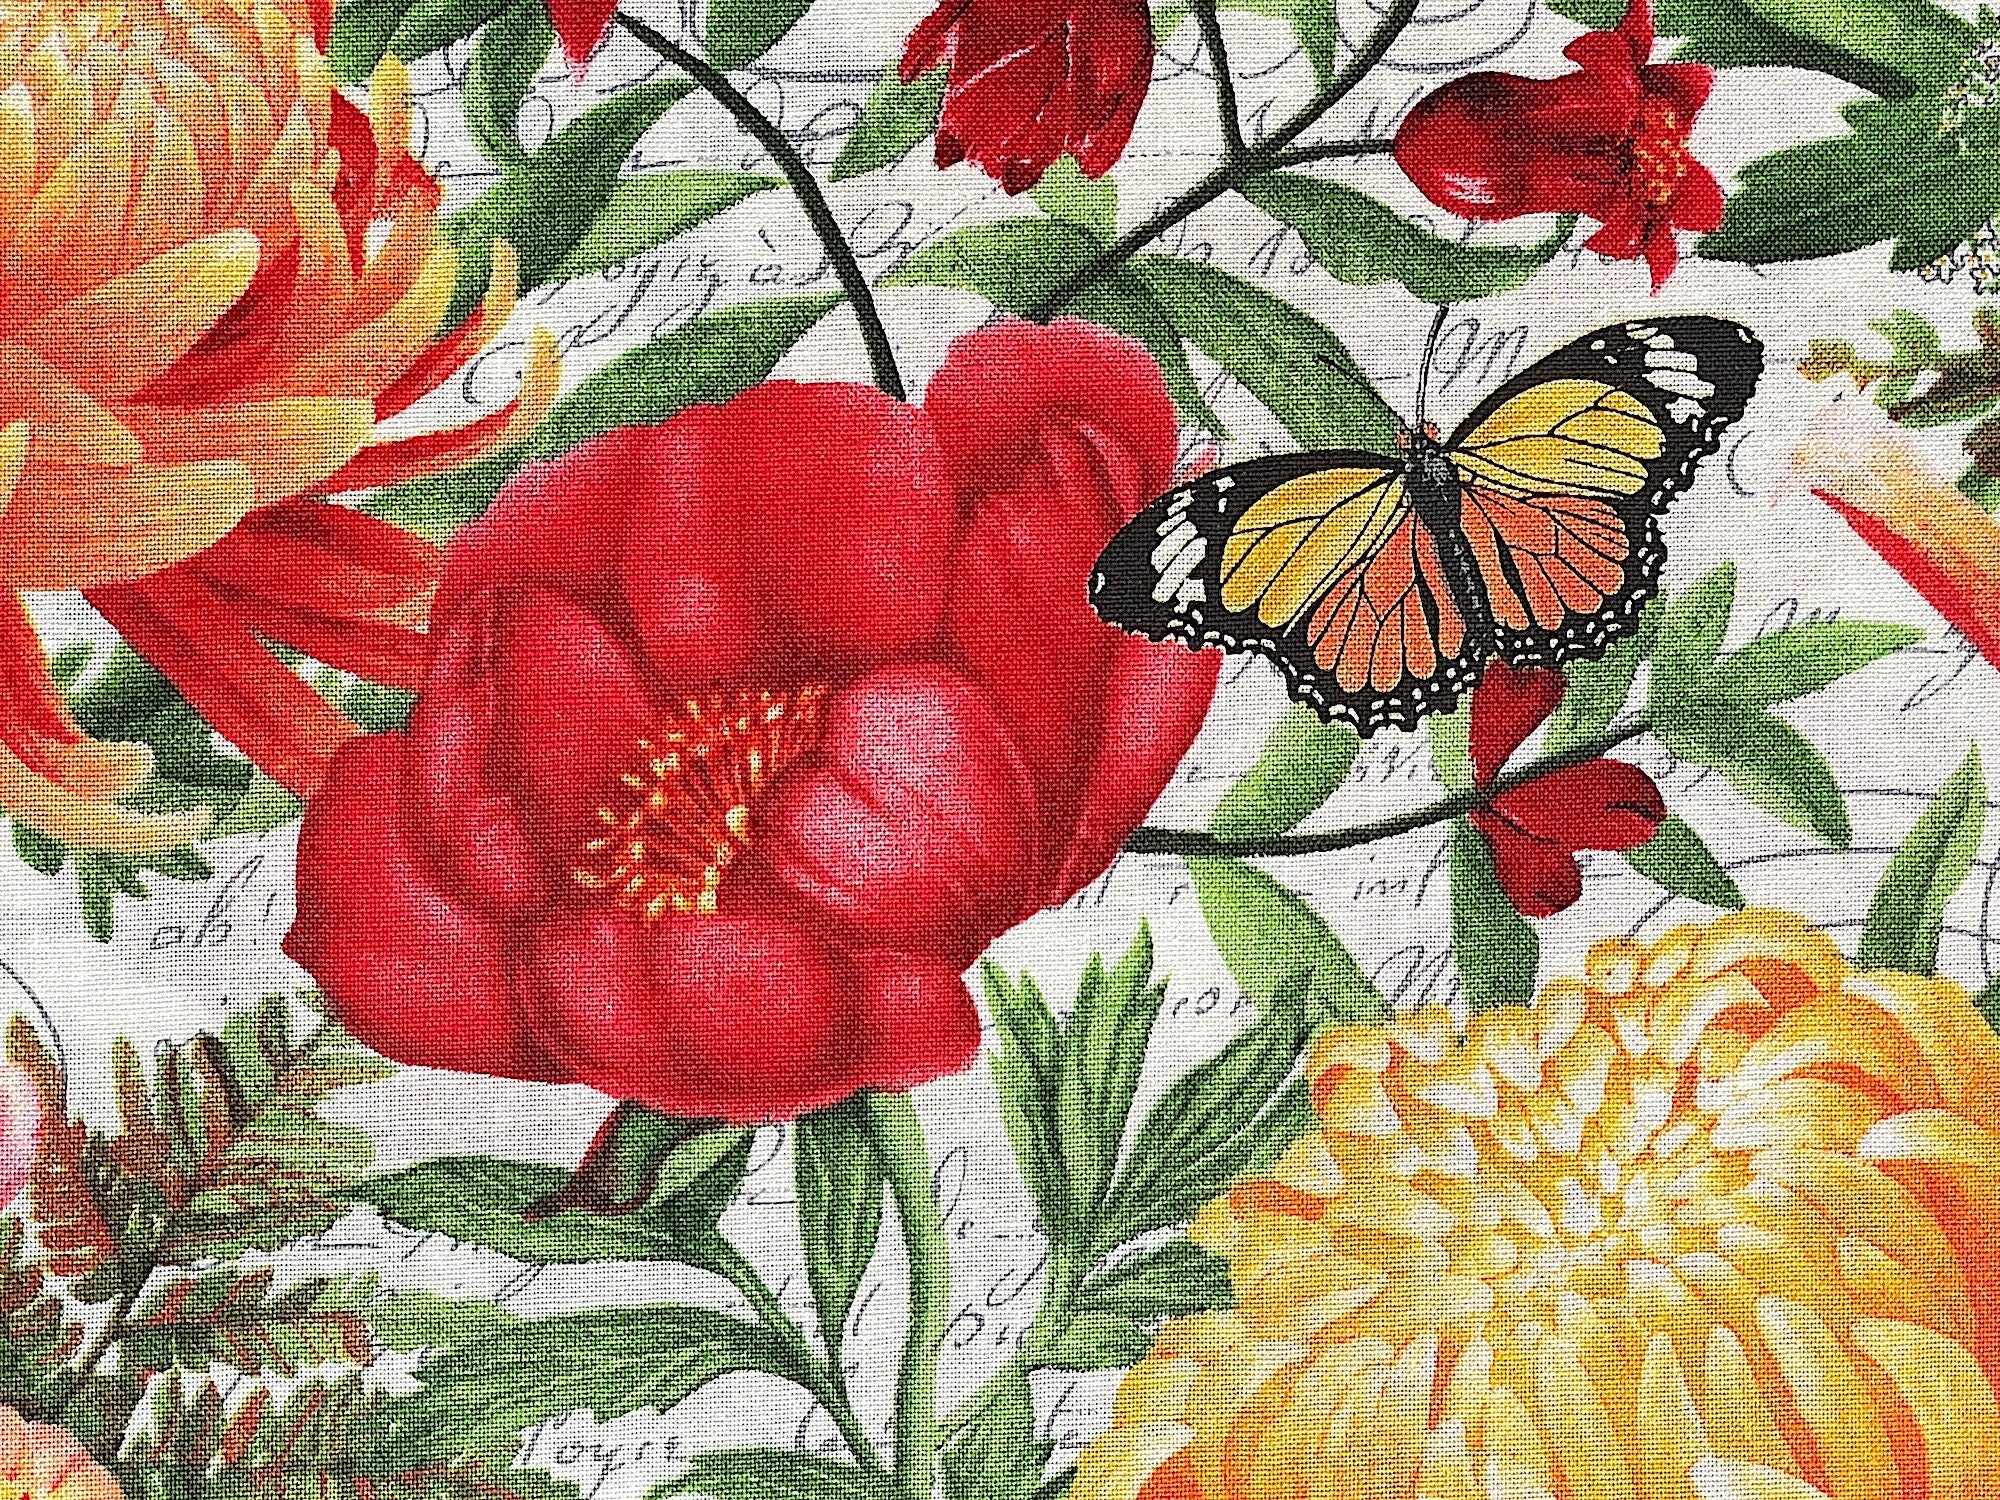 Close up of poppies and a butterfly.